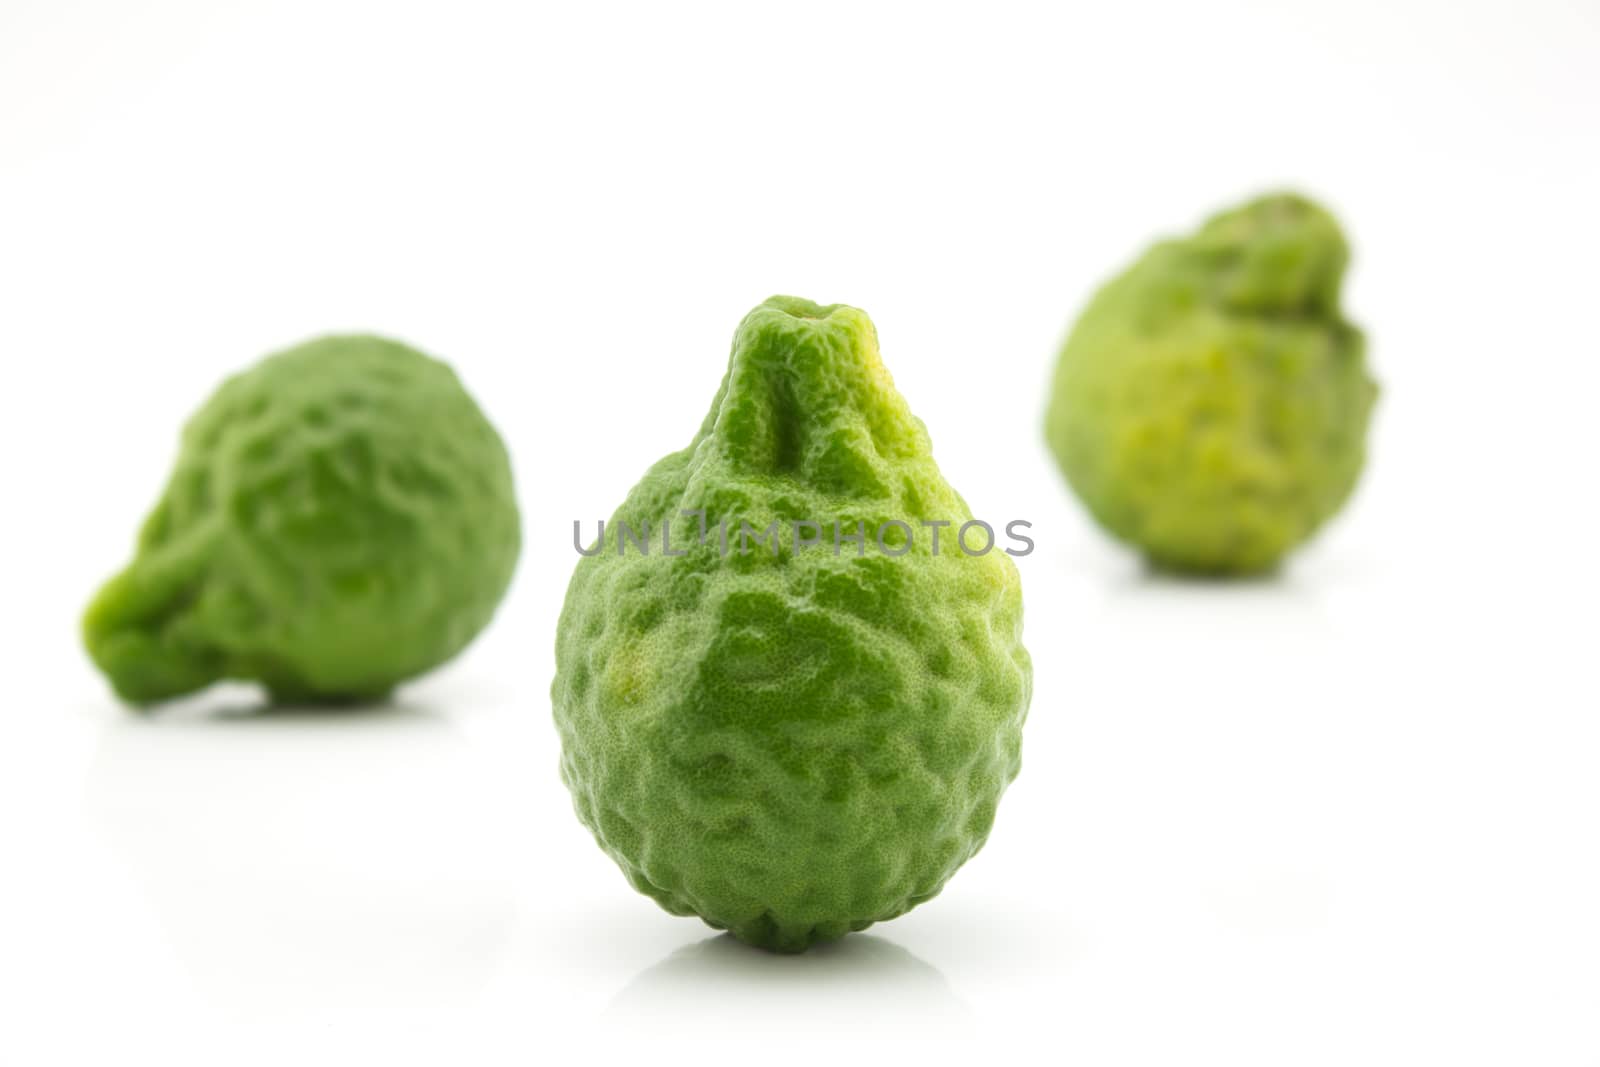 kaffir lime isolate on white background by vitawin